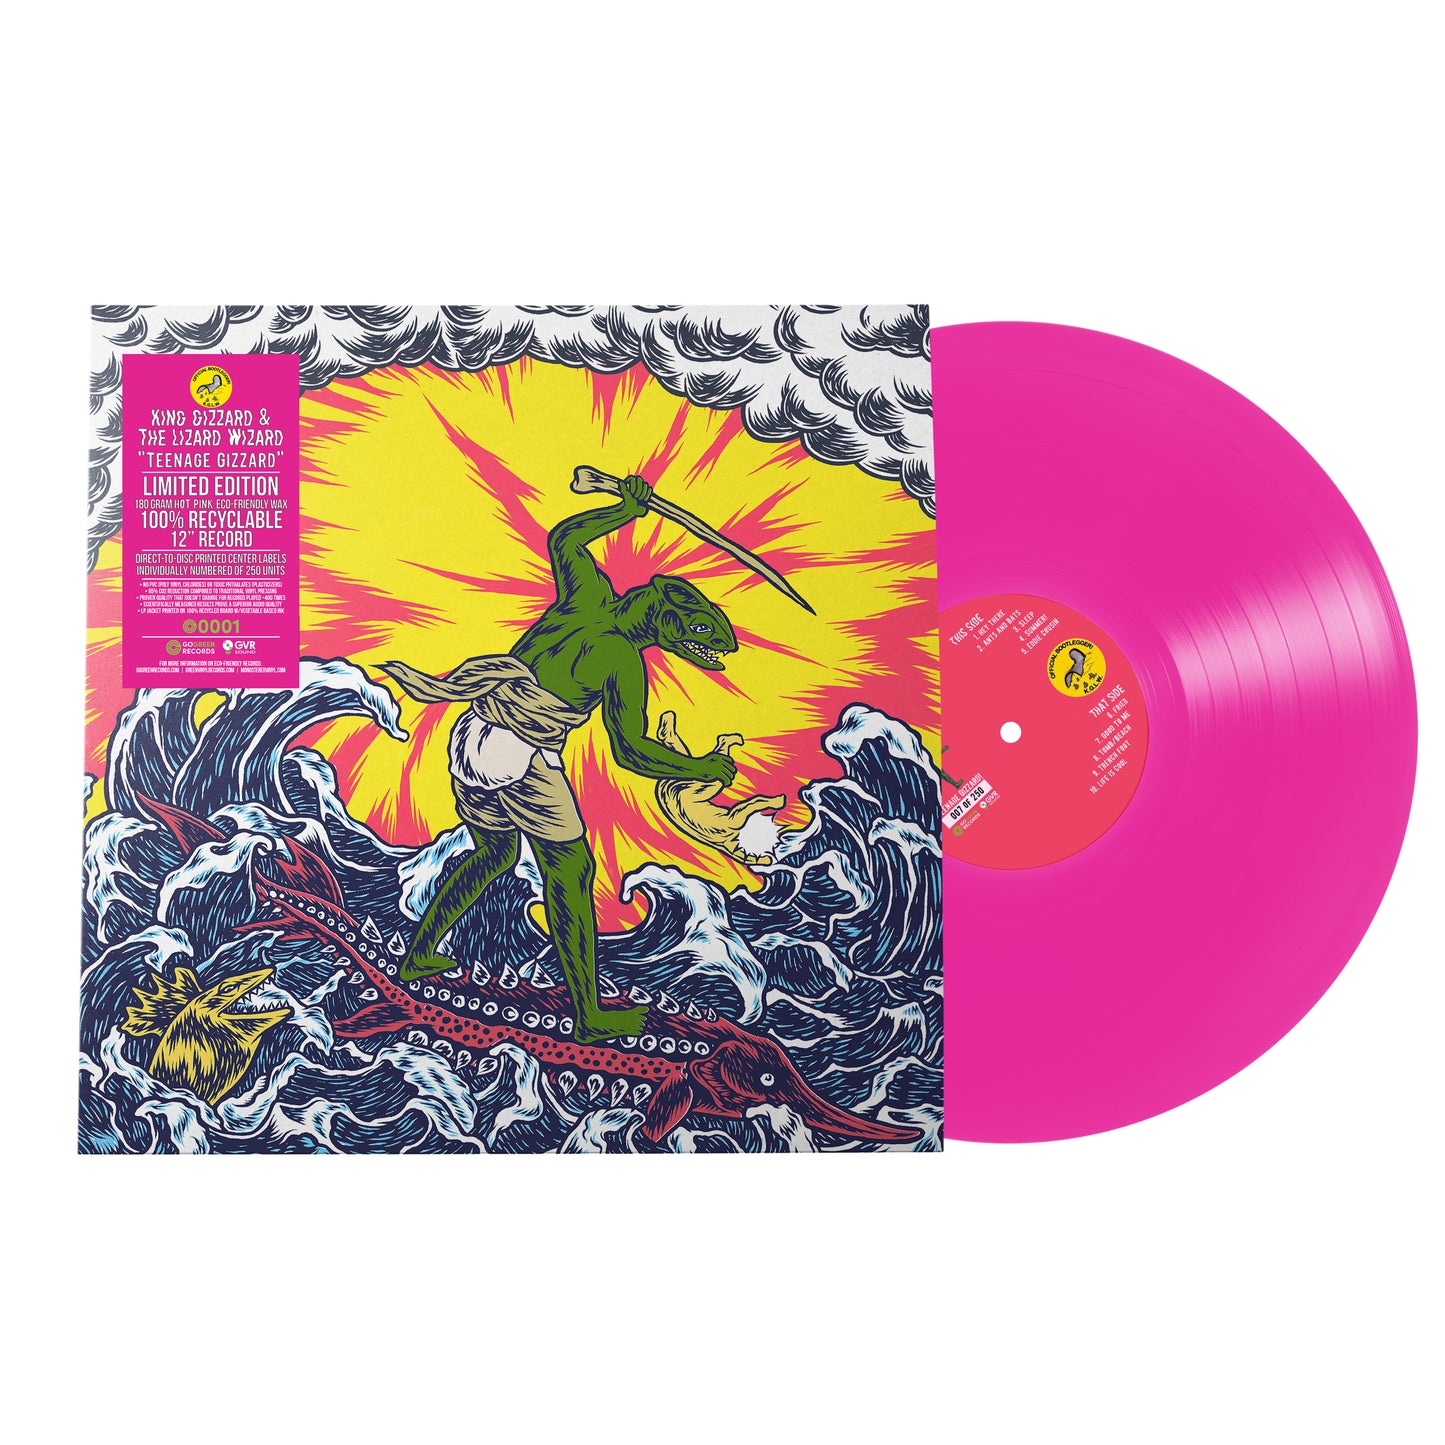 King Gizzard & The Lizard Wizard Teenage Gizzard (Monostereo Exclusive | 180 Gram Eco-Friendly Hot Pink / 100% Recyclable) | Vinyl